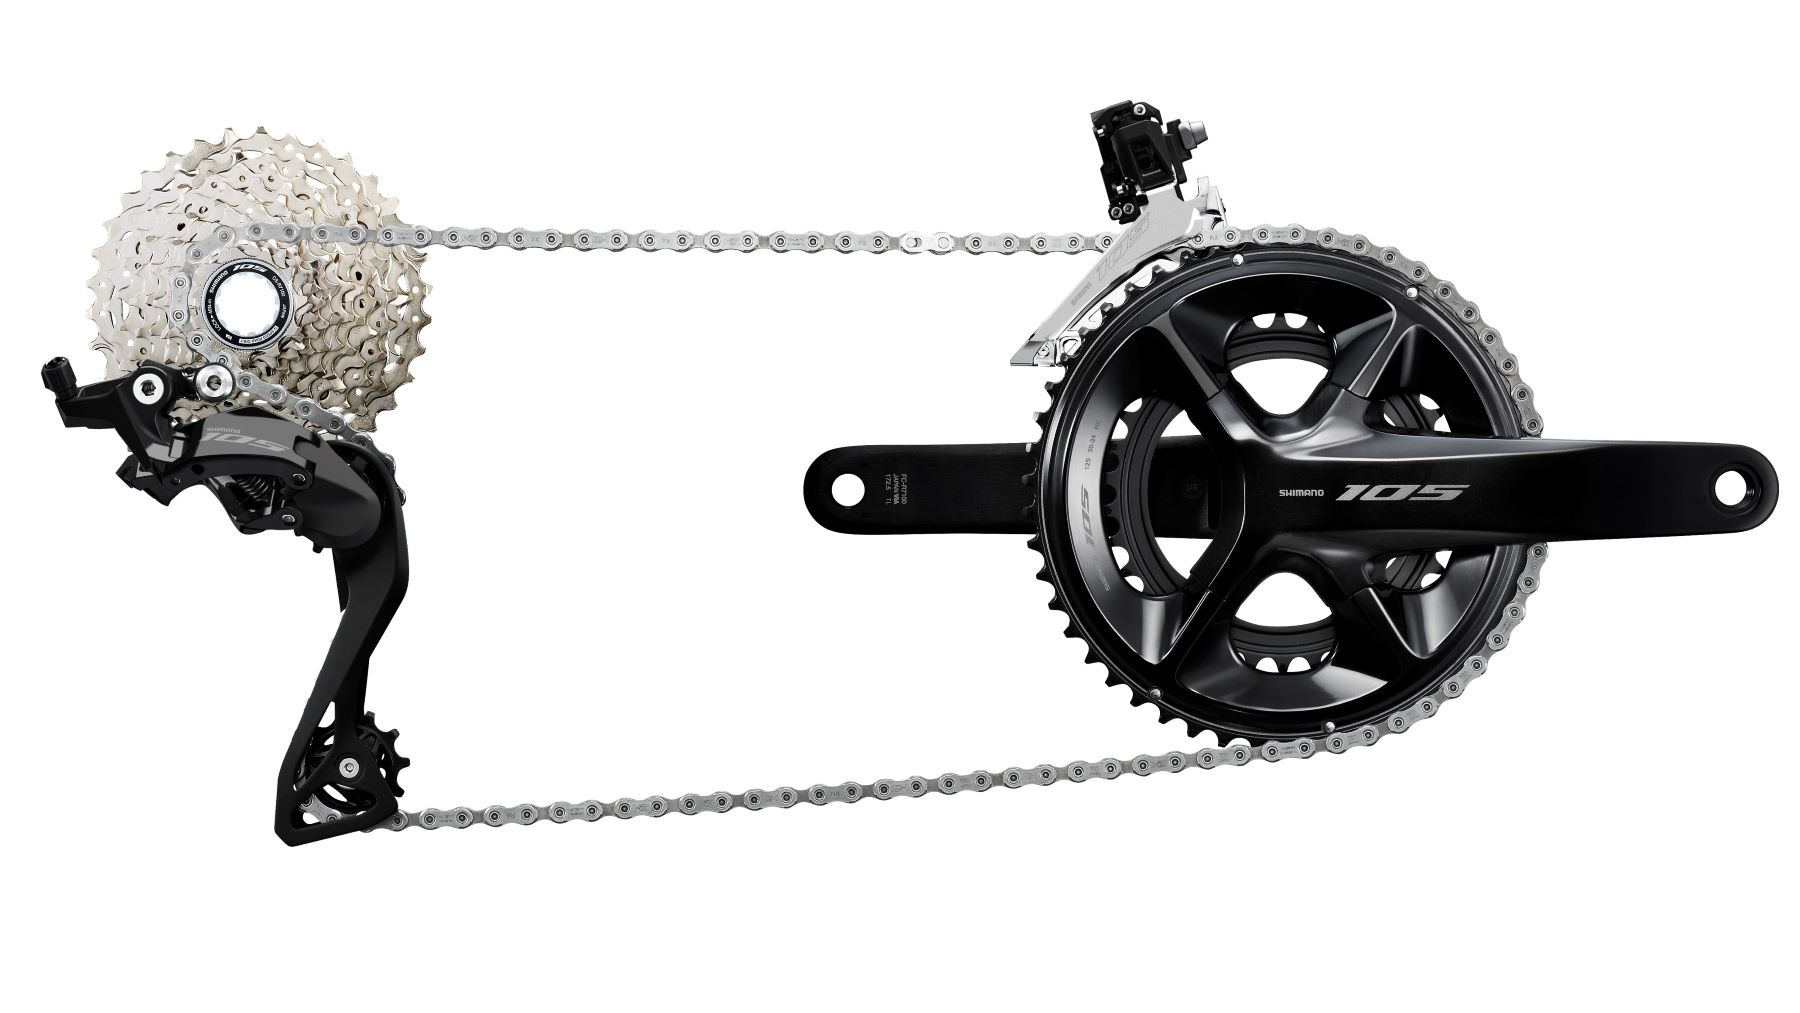 Shimano adds new 12-speed mechanical groupsets to 105 and GRX ranges